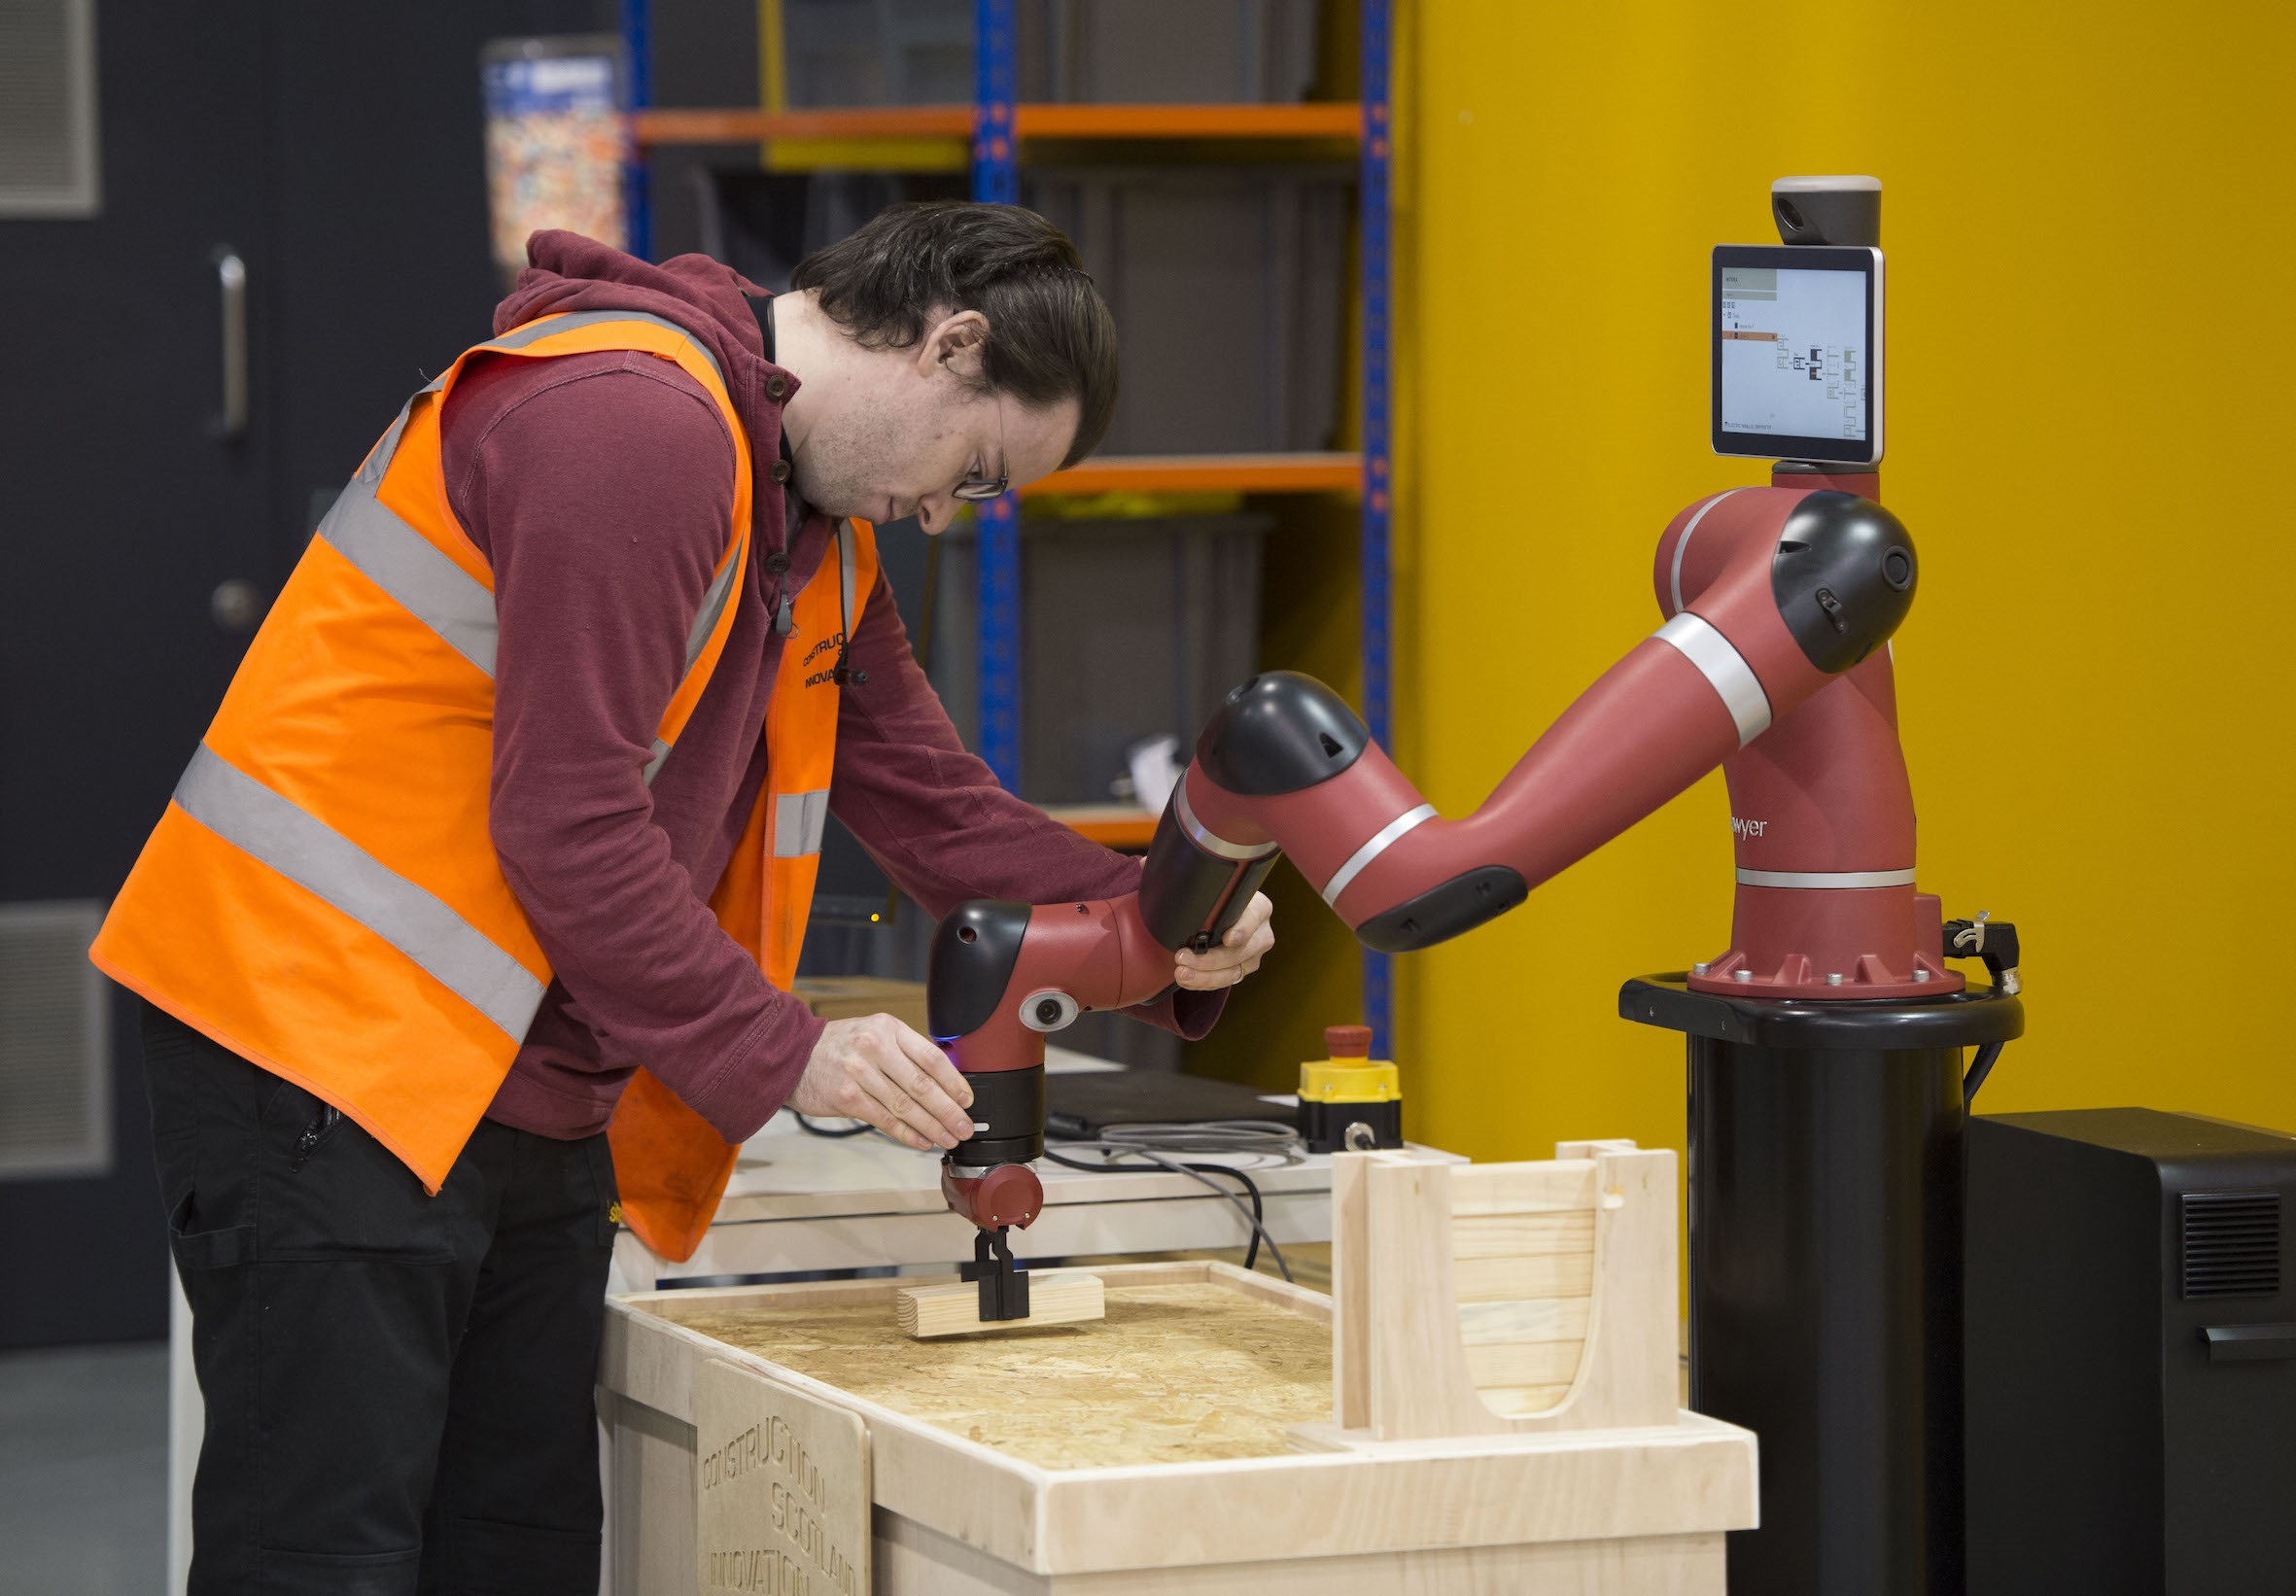 And finally... Scotland’s first ever showcase of automation and robotics to take place